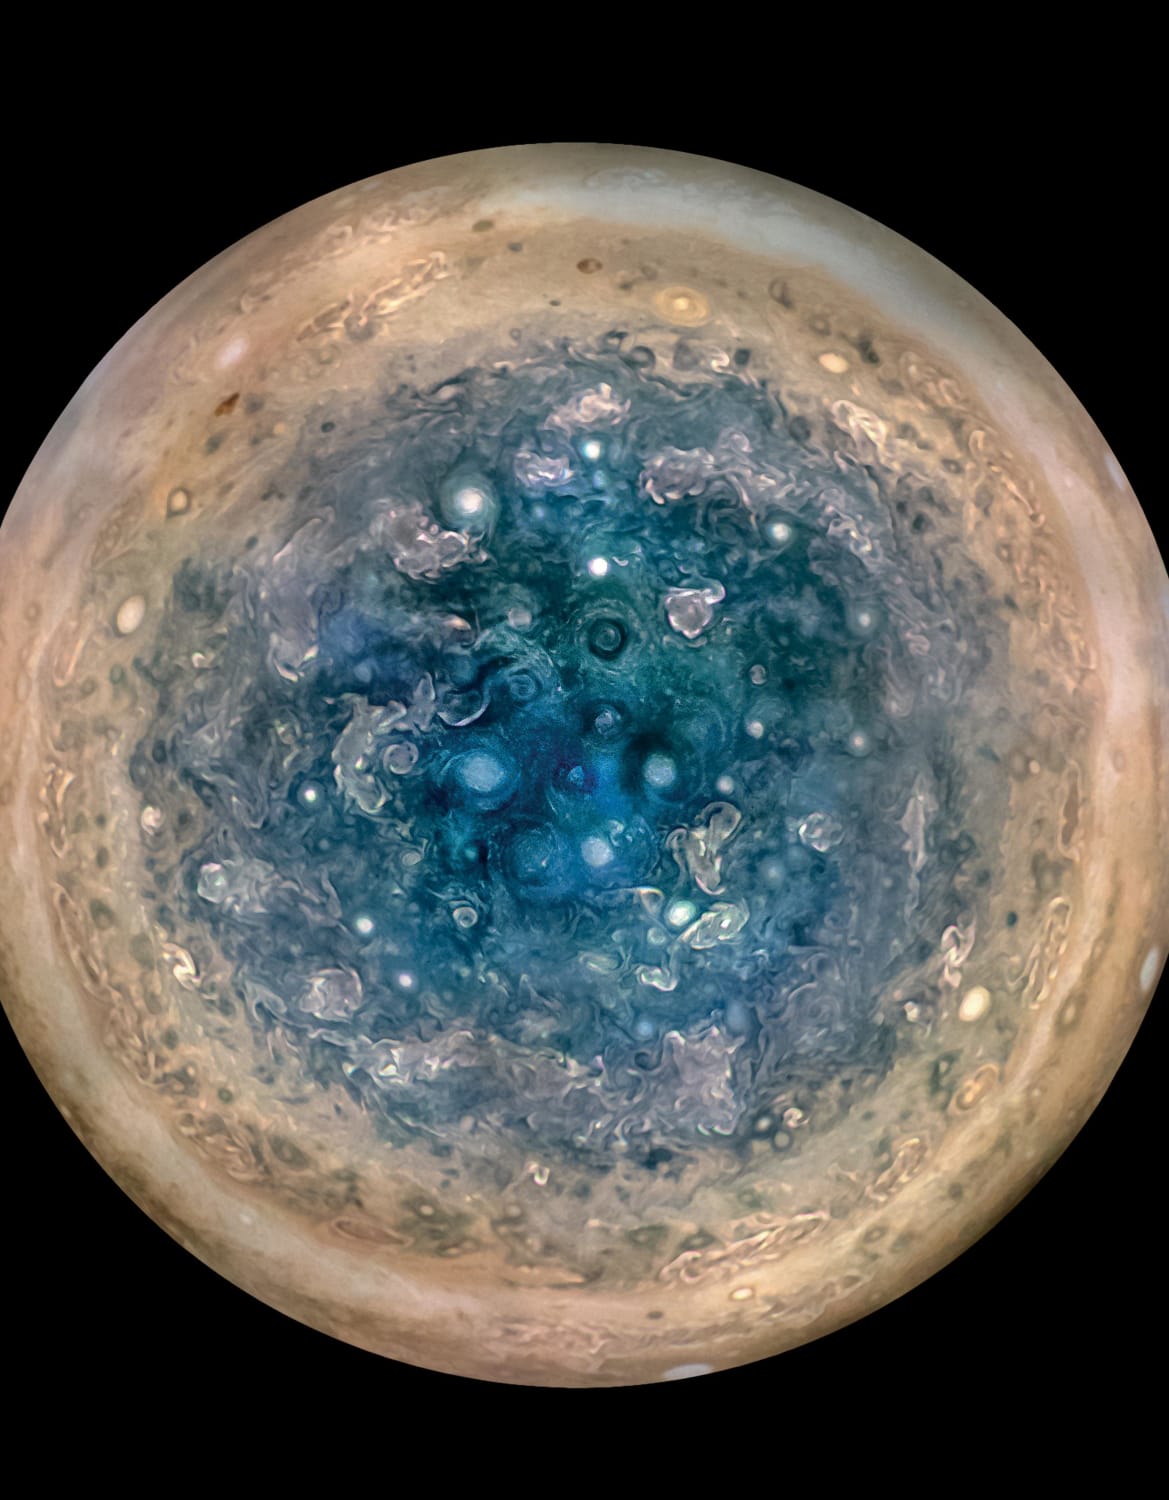 Jupiter’s south pole, as seen by NASA’s Juno spacecraft from an altitude of 32,000 miles. The oval features are cyclones, up to 600 miles in diameter.